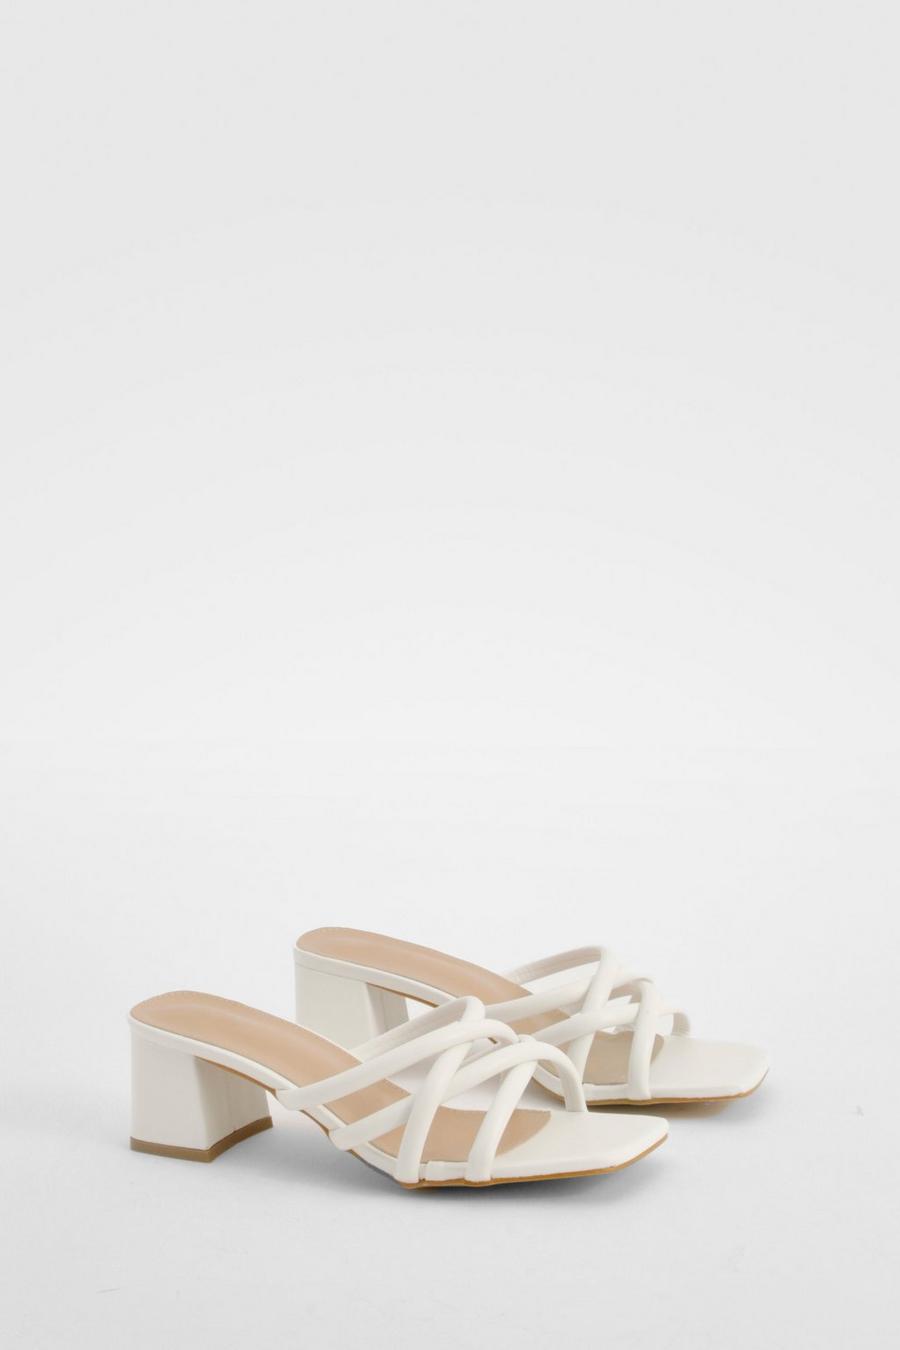 White Strappy Block Heeled Mules     